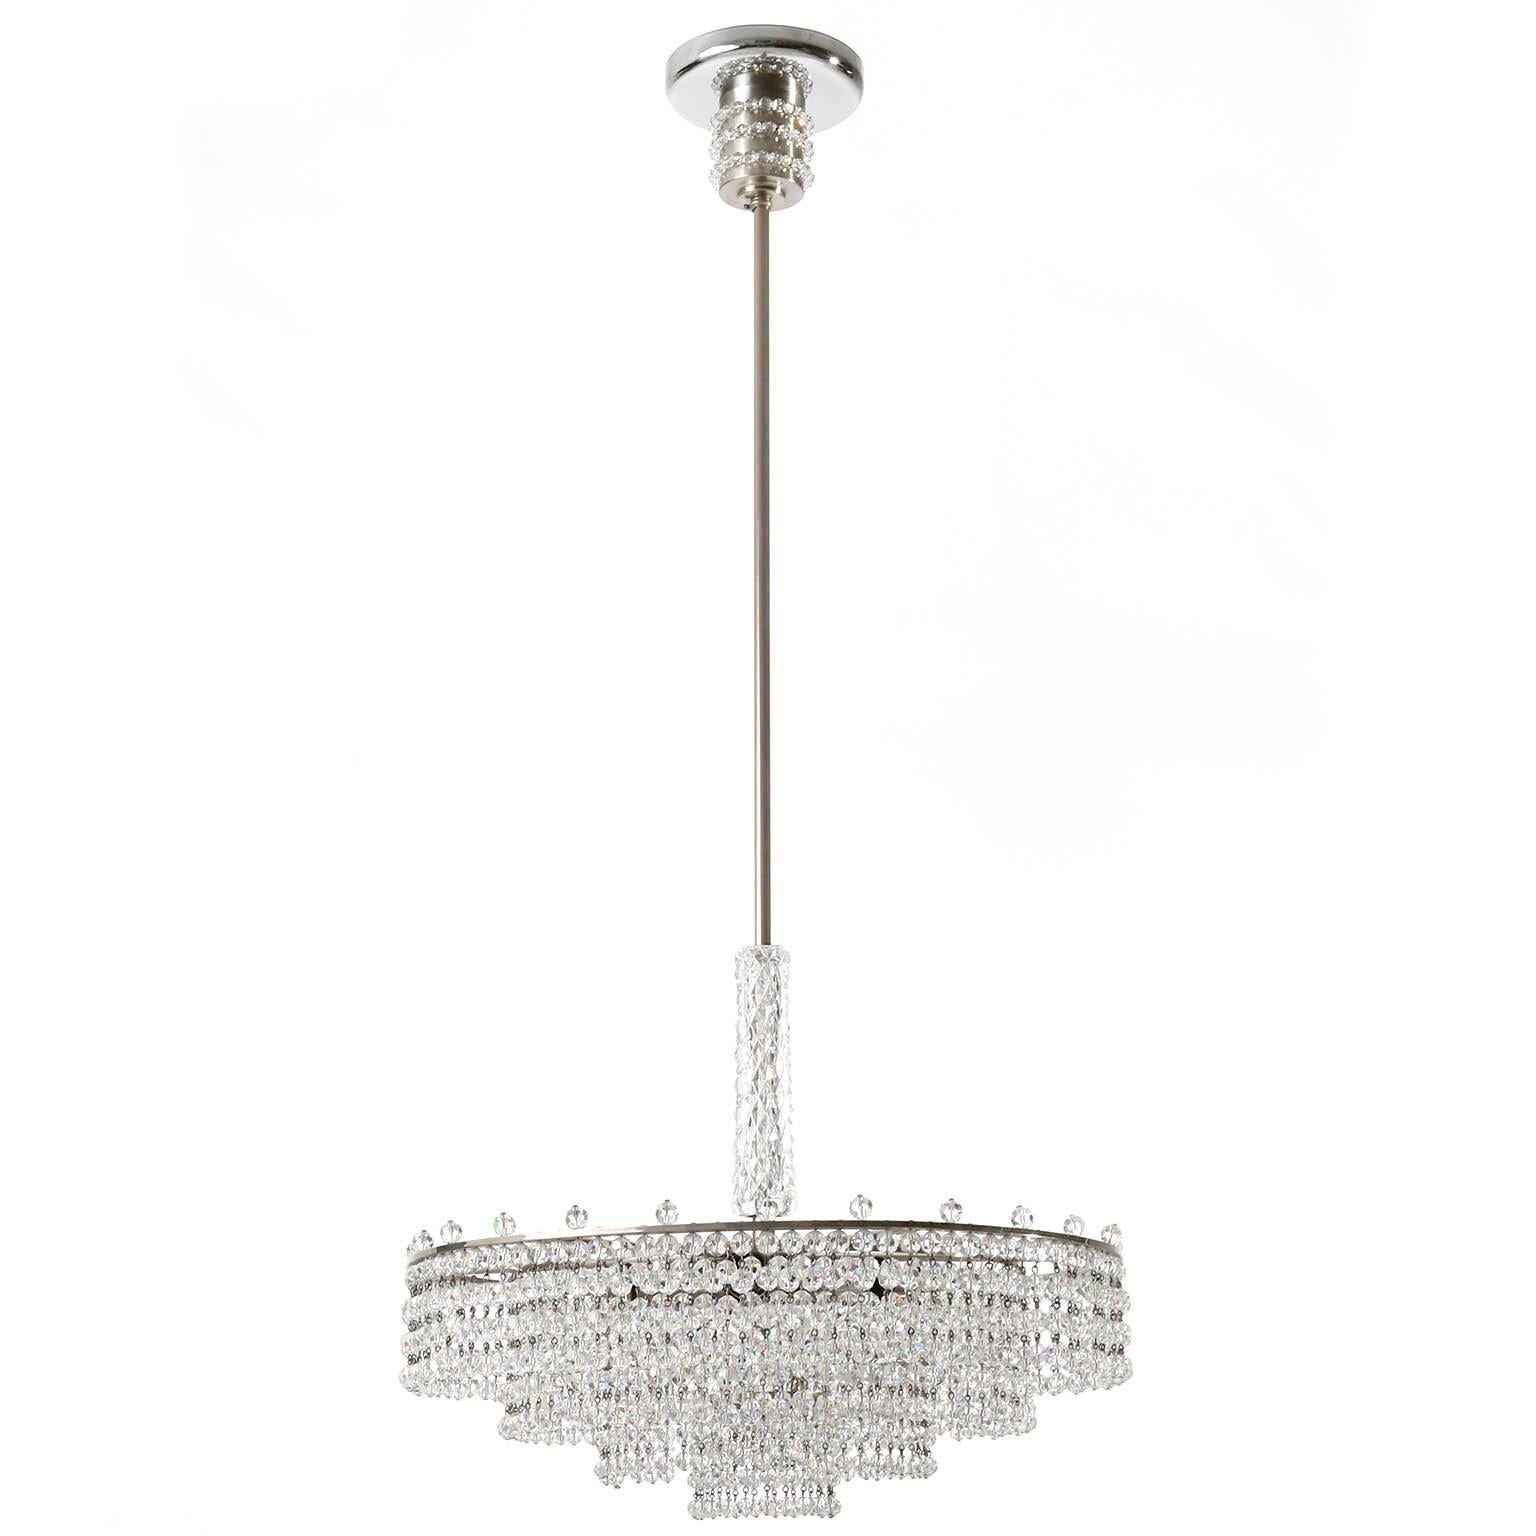 Palwa Chandelier, Nickel Cut Crystal Glass, Germany, 1960s For Sale 1